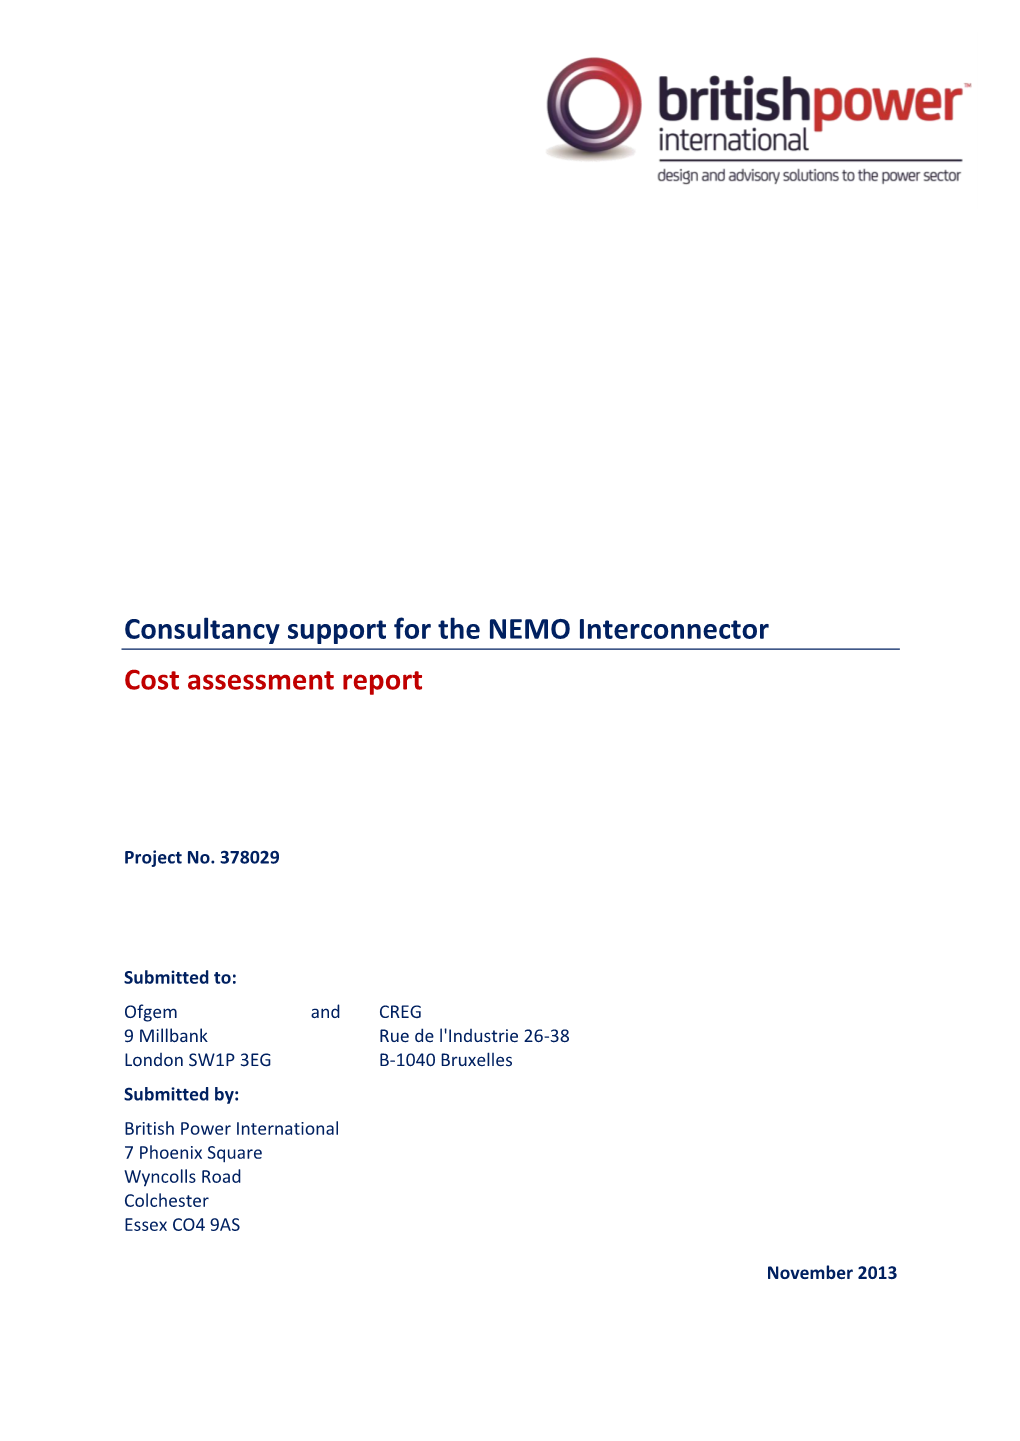 Cost Assessment Report for the NEMO Interconnector By